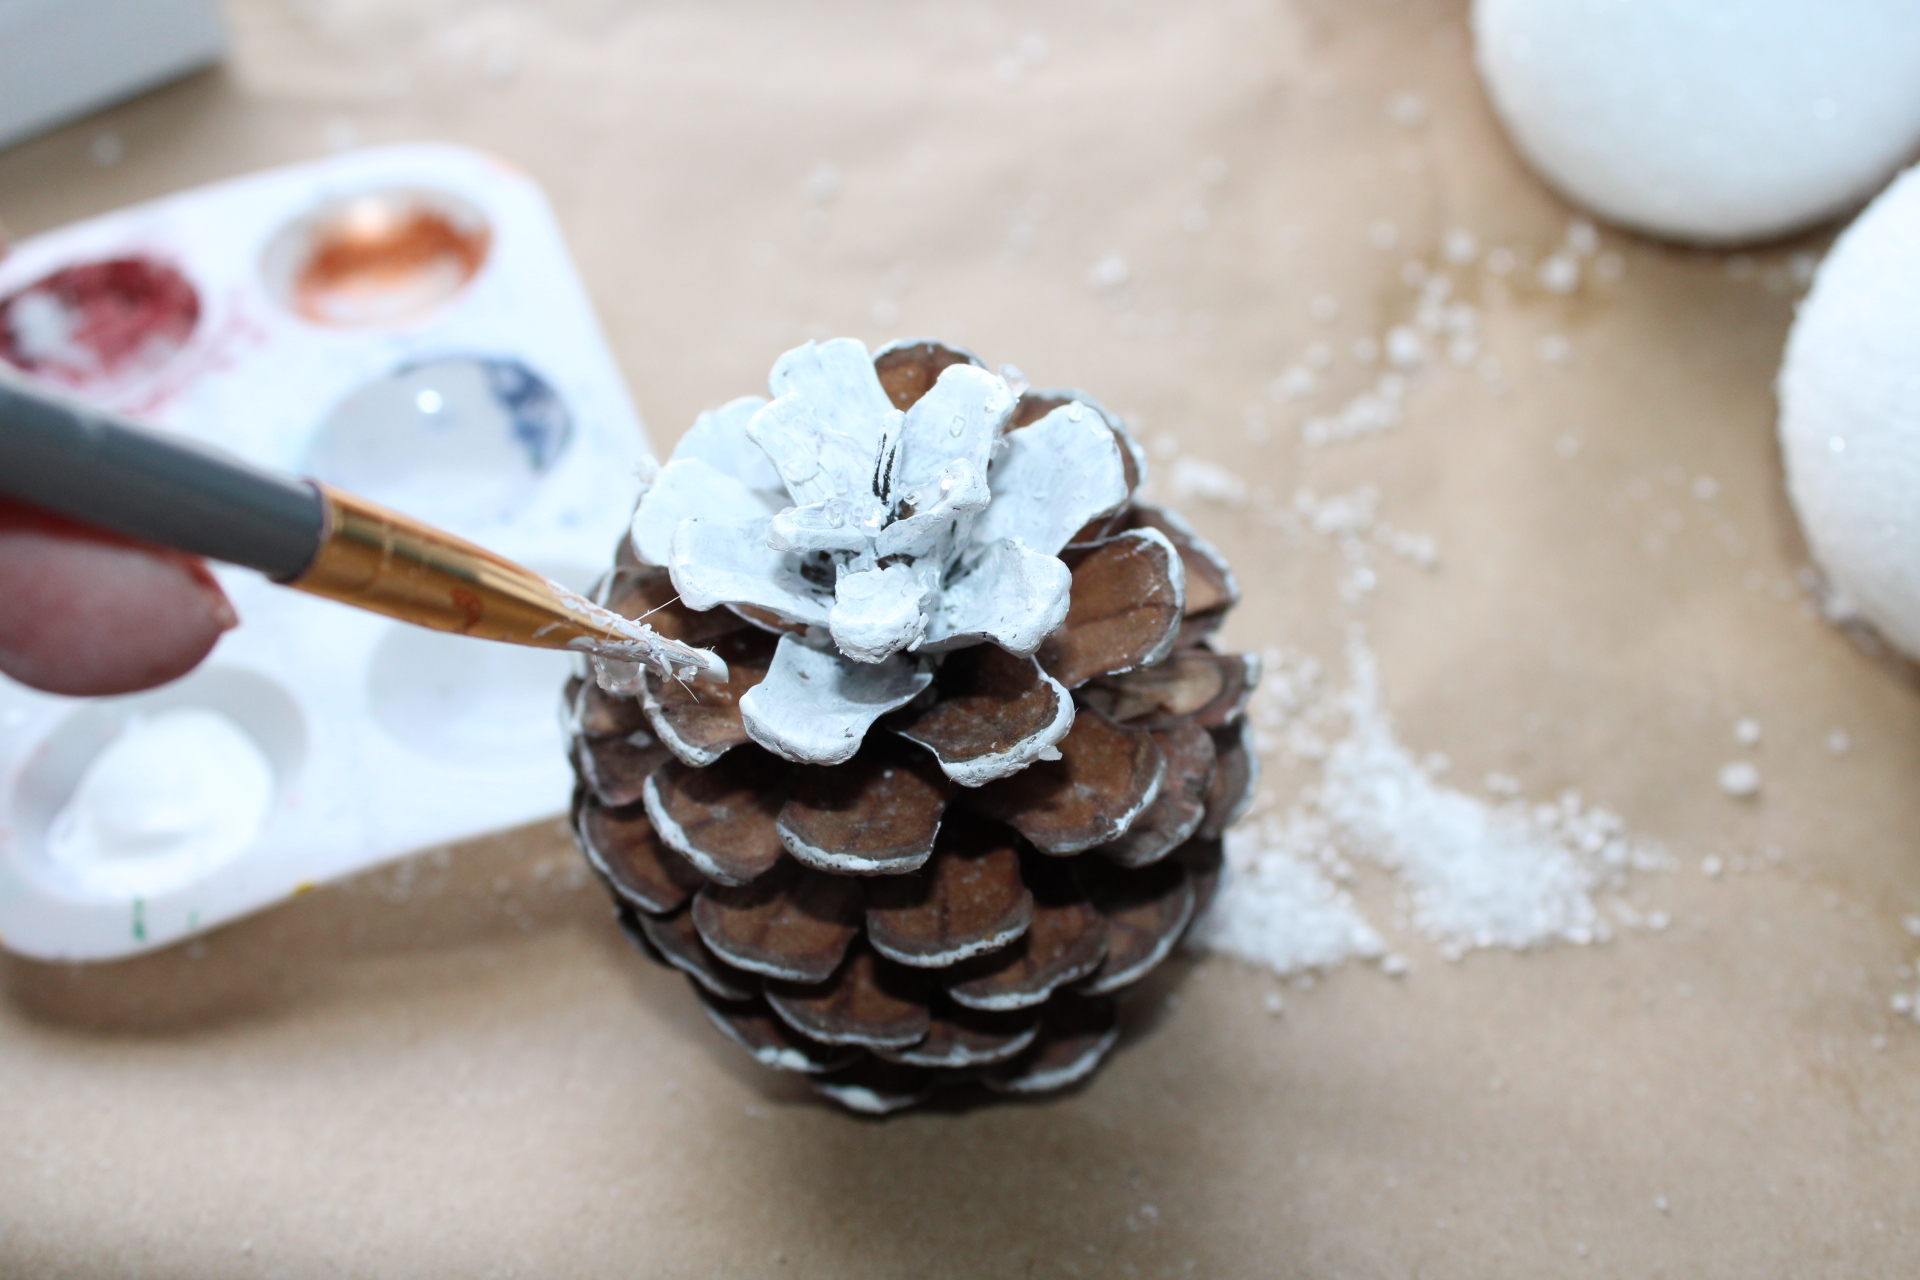 Using a paint brush to paint a small pinecone white. It will go in the DIY snowball centerpiece.